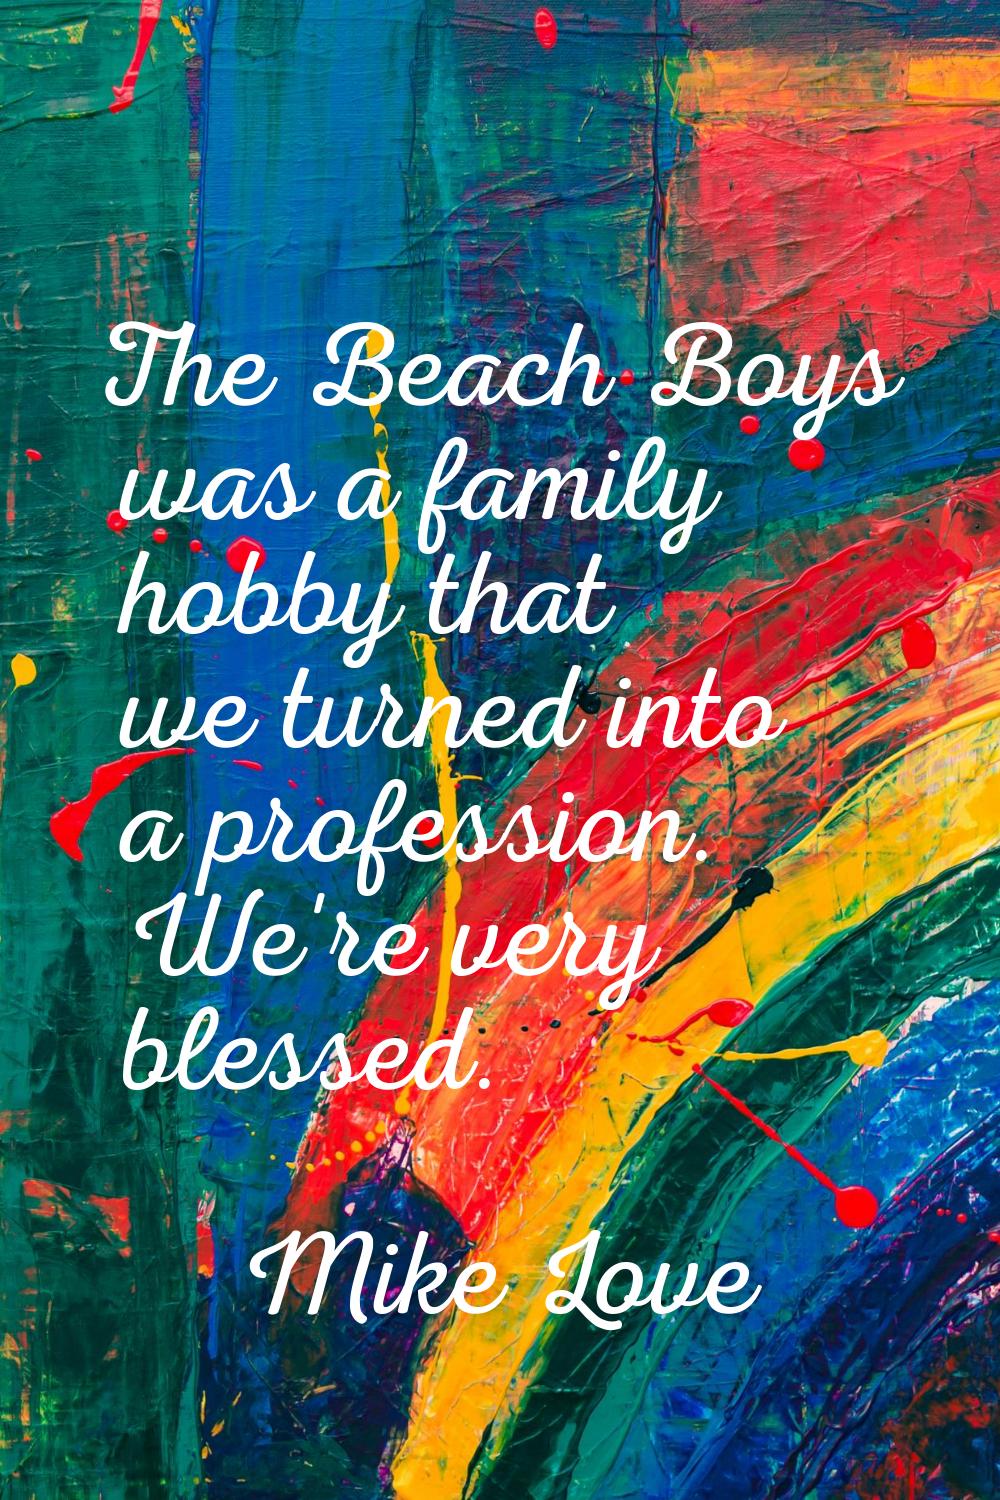 The Beach Boys was a family hobby that we turned into a profession. We're very blessed.